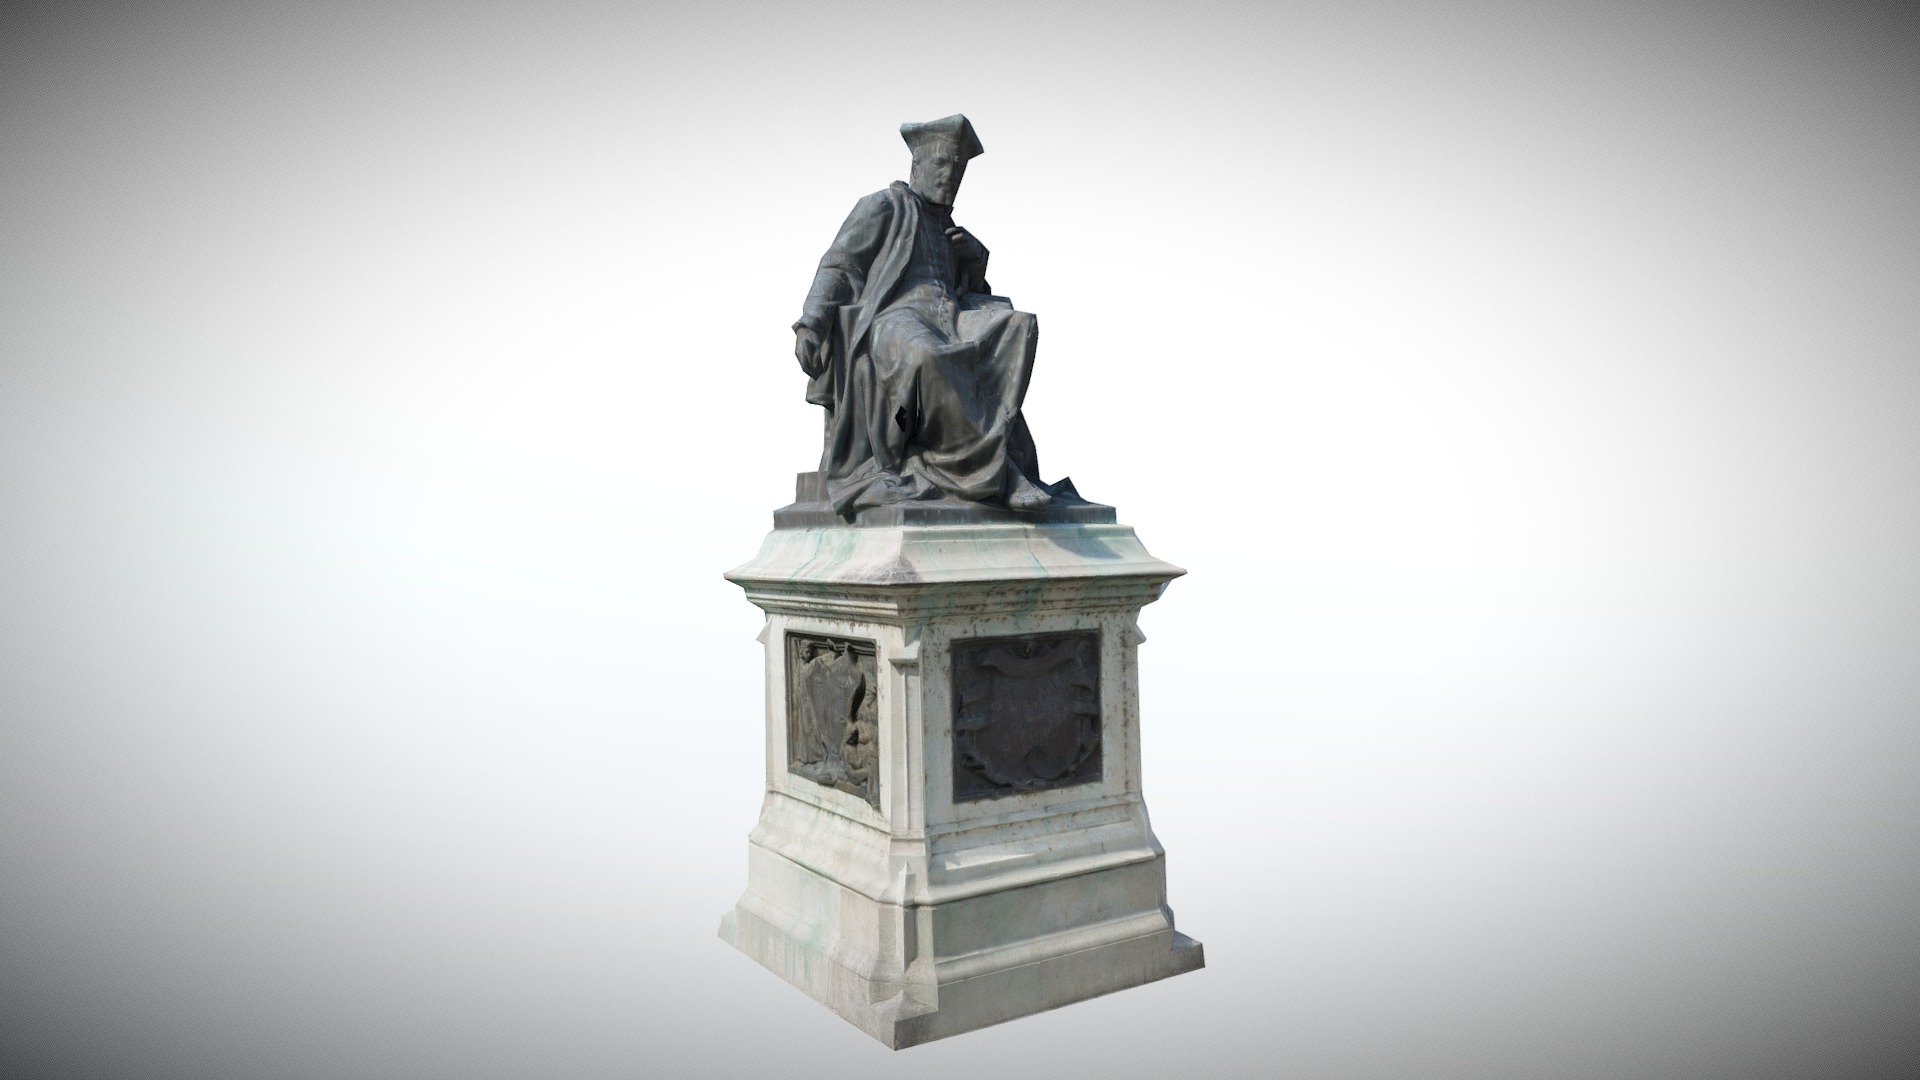 3D model Statue Rabelais - This is a 3D model of the Statue Rabelais. The 3D model is about a statue of a person sitting on a pedestal.